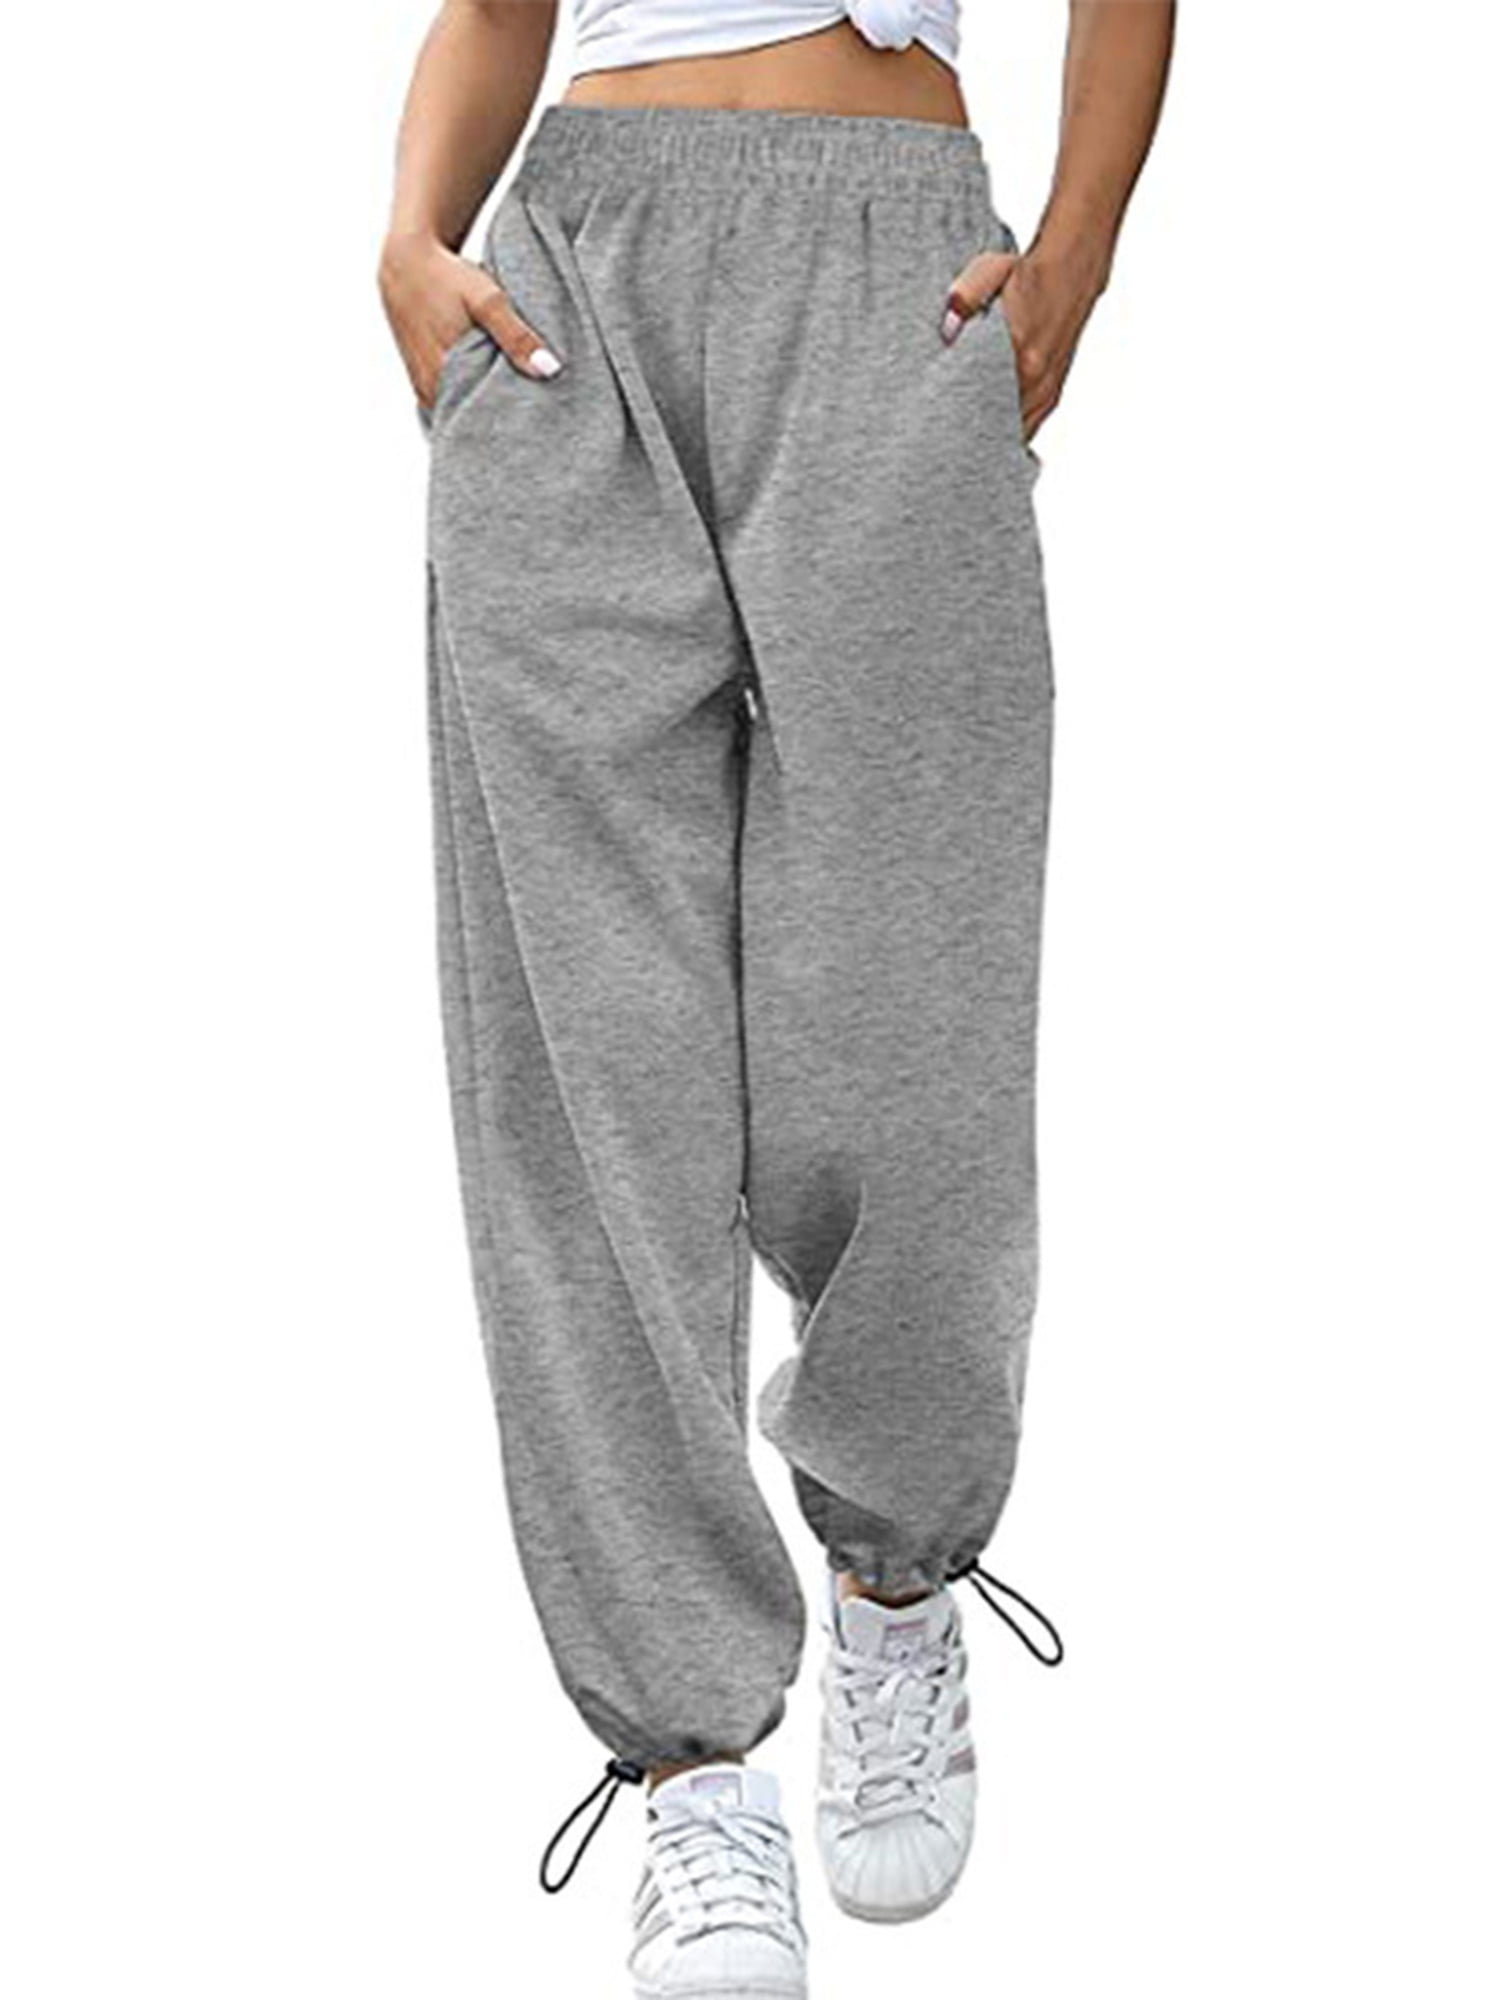 Women's Sweatpants Baggy Plus Size High Waisted Loose Causal Solid Cinch  Bottom Jogger Sweats Pants Pocketed